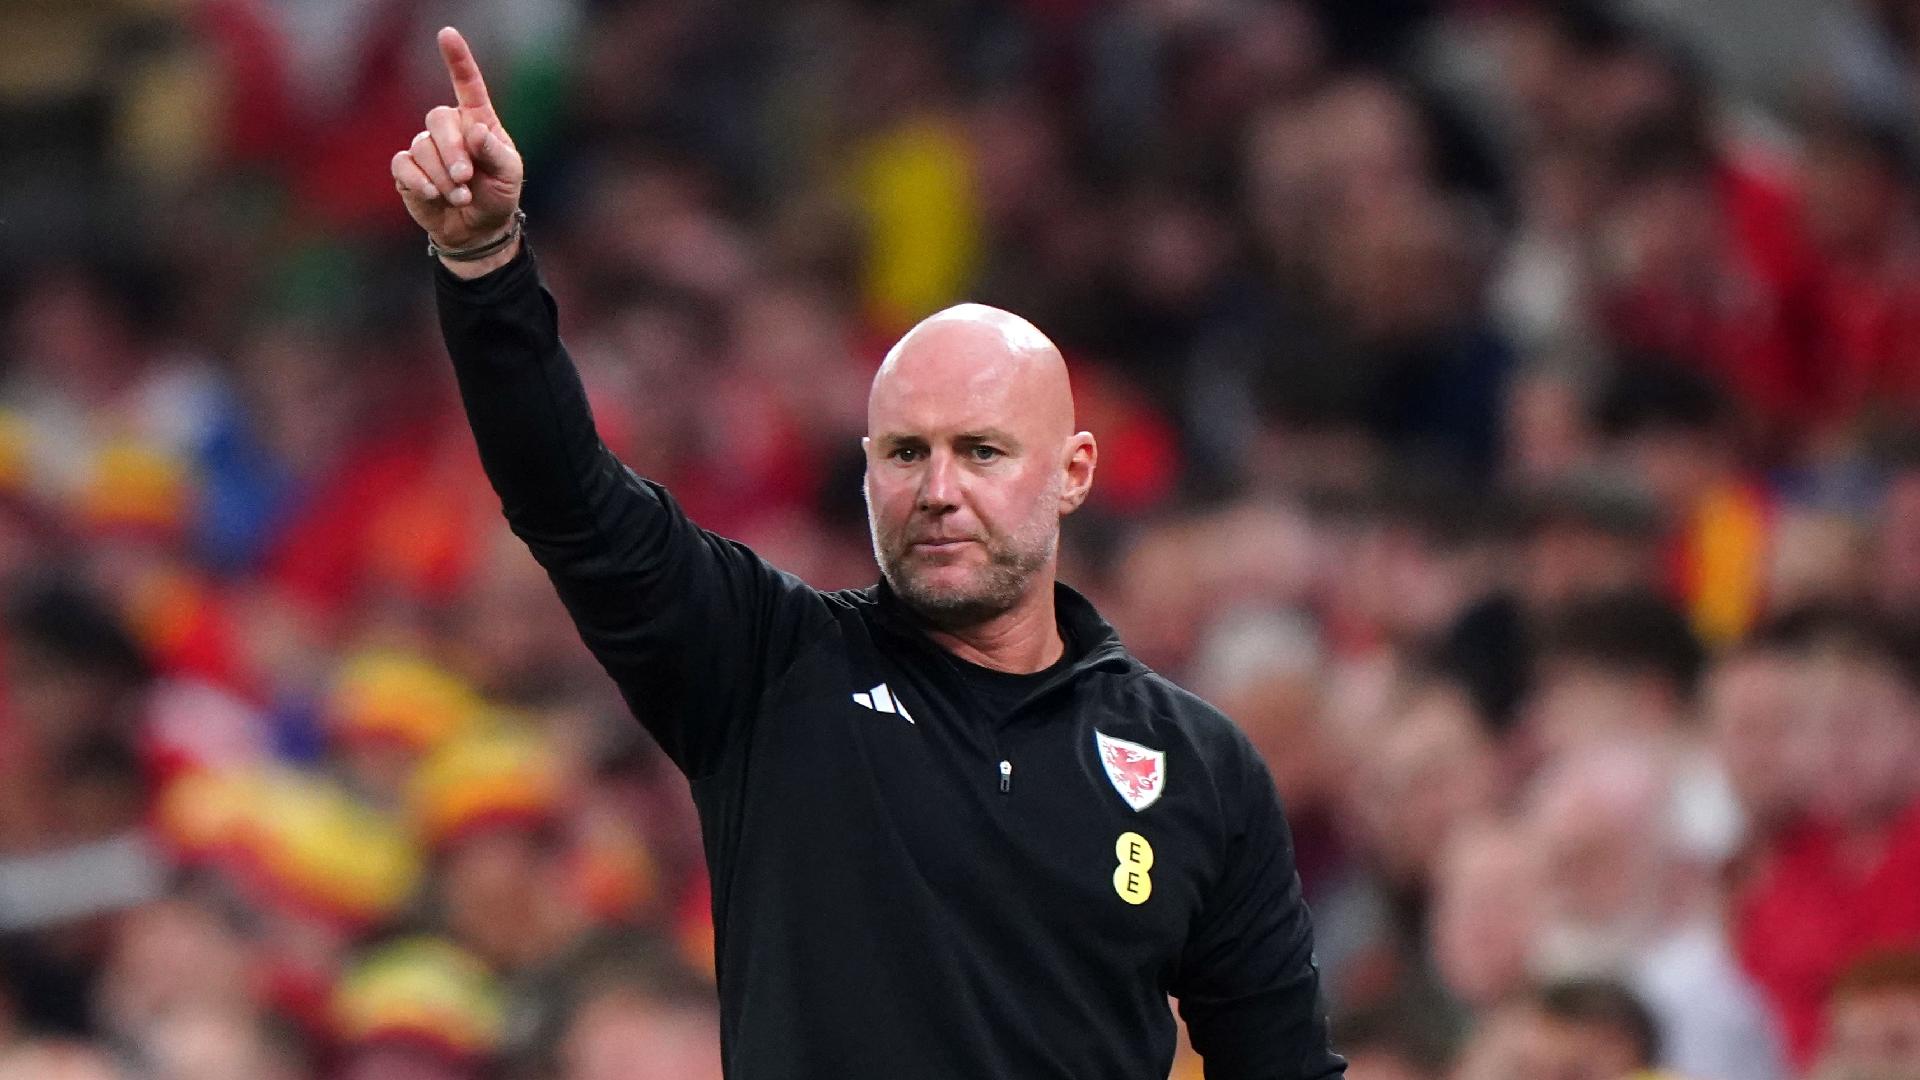 Rob Page expects Wales to take positives from stalemate into crunch Latvia clash